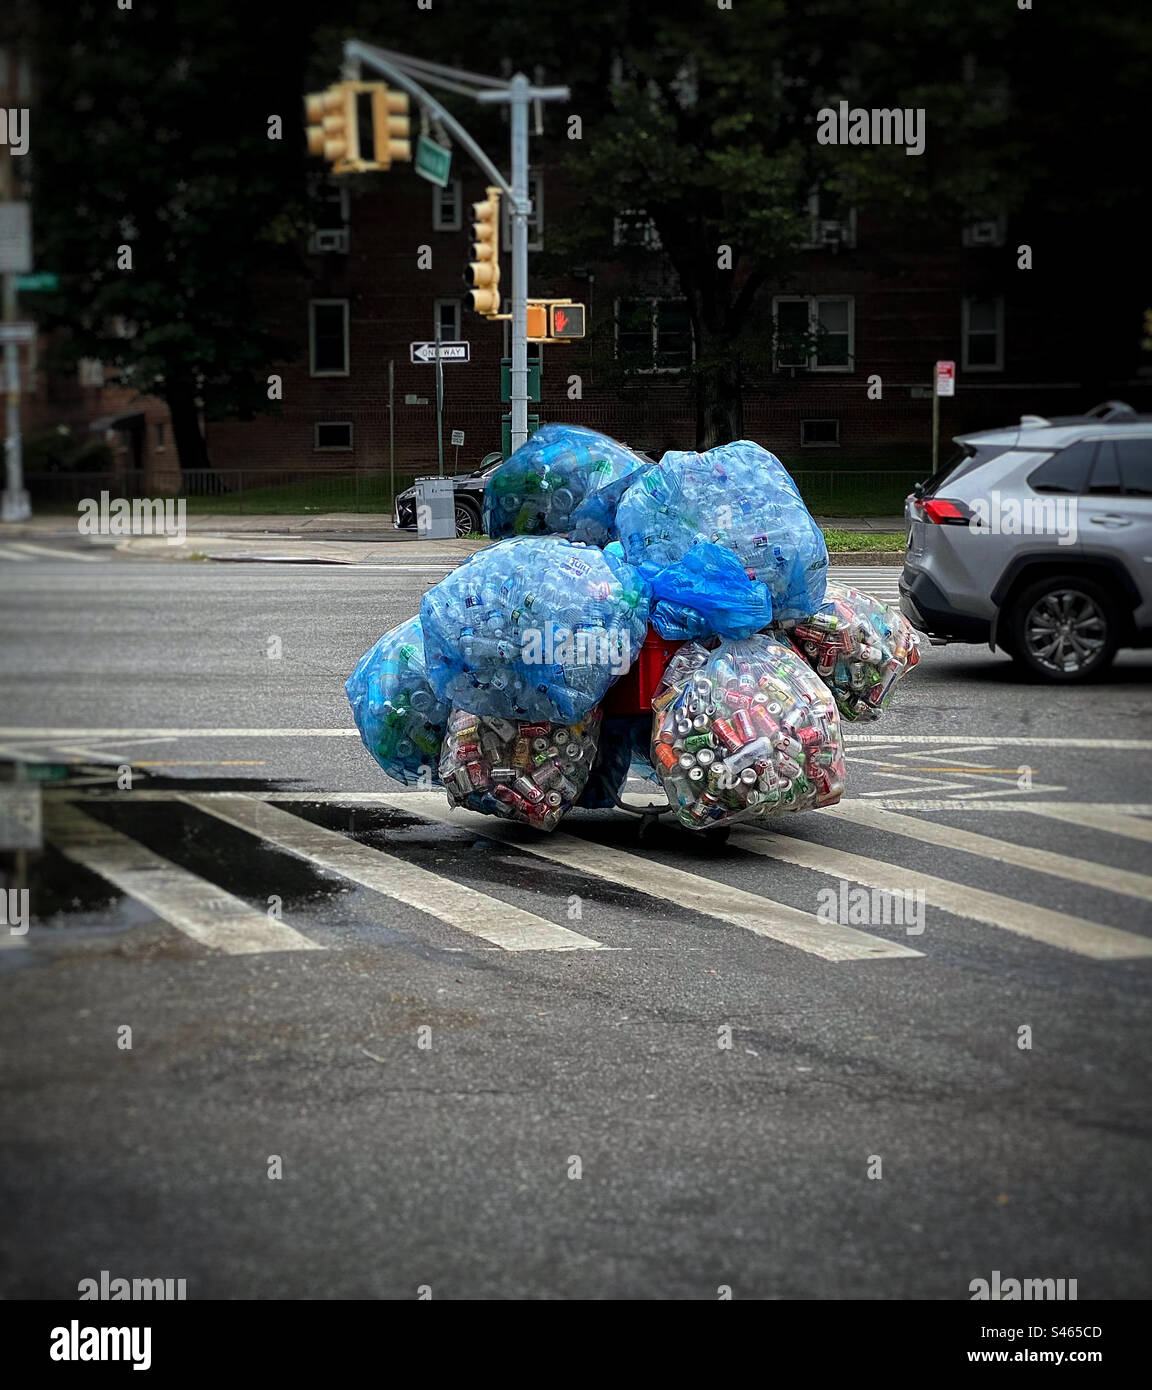 Cart with bags of recyclables being wheeled across a city street Stock Photo